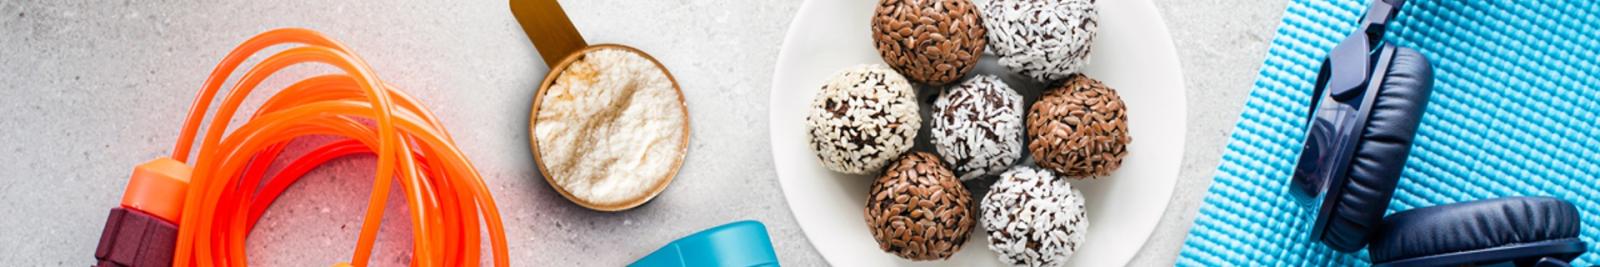 image of protein balls and protein powder